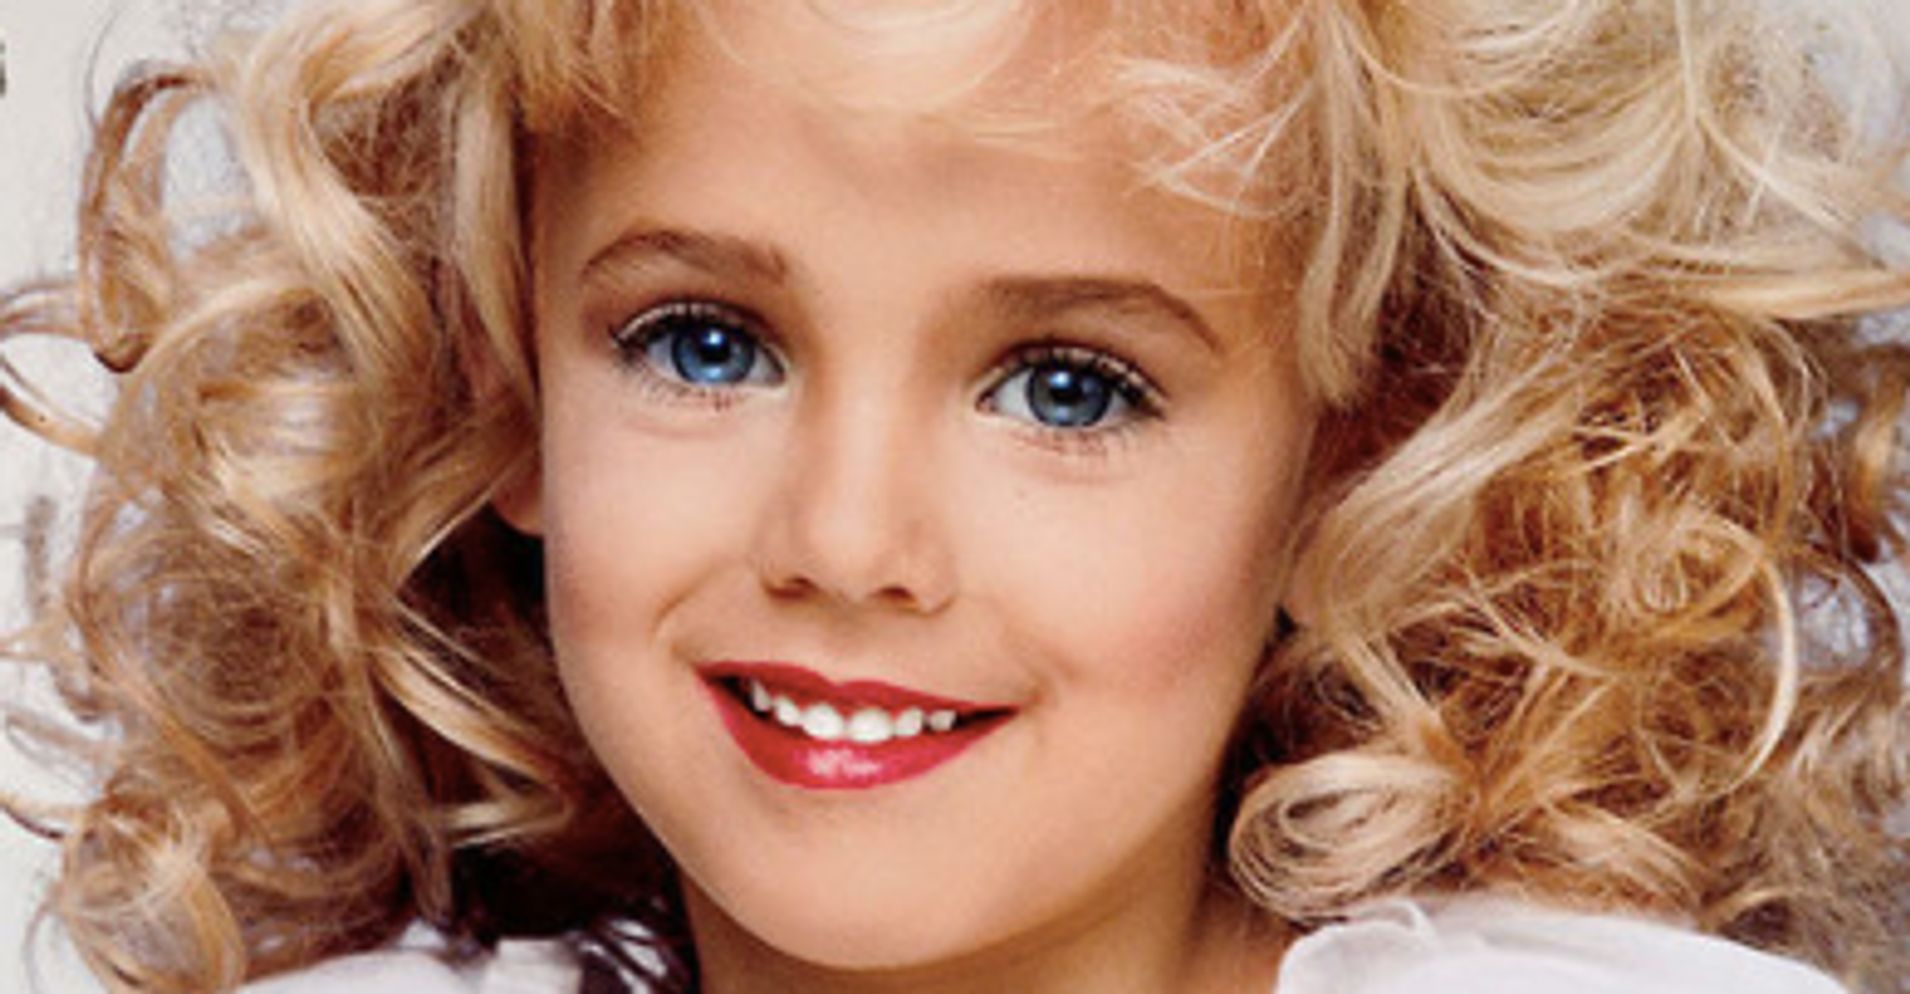 Experts Think They Can Solve JonBenét Ramsey Case In New Docuseries